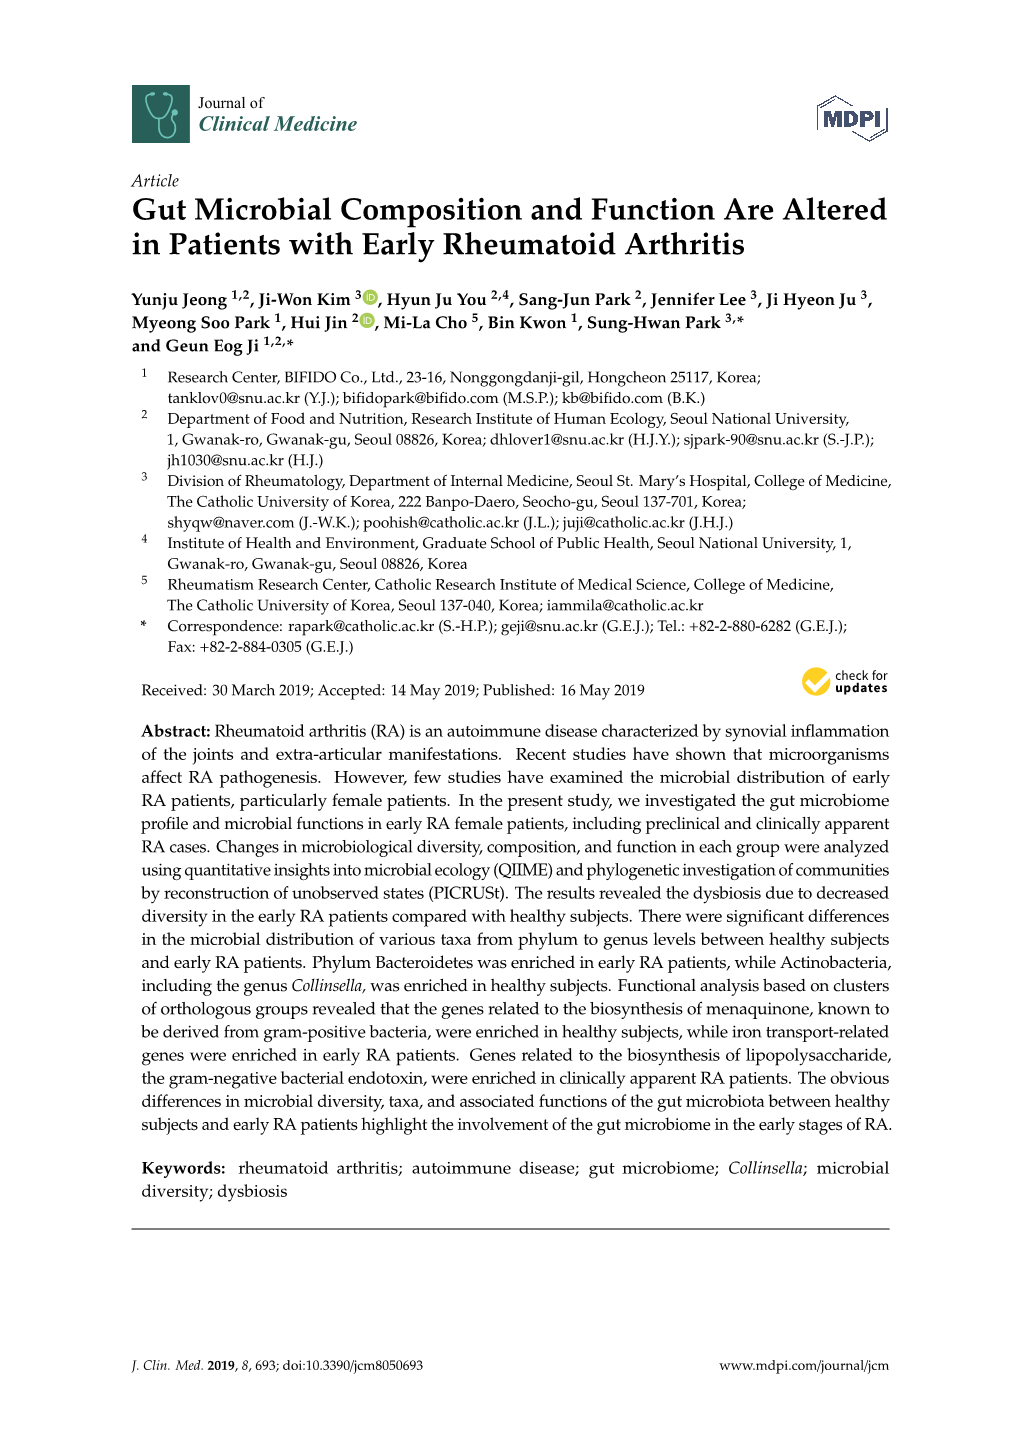 Gut Microbial Composition and Function Are Altered in Patients with Early Rheumatoid Arthritis